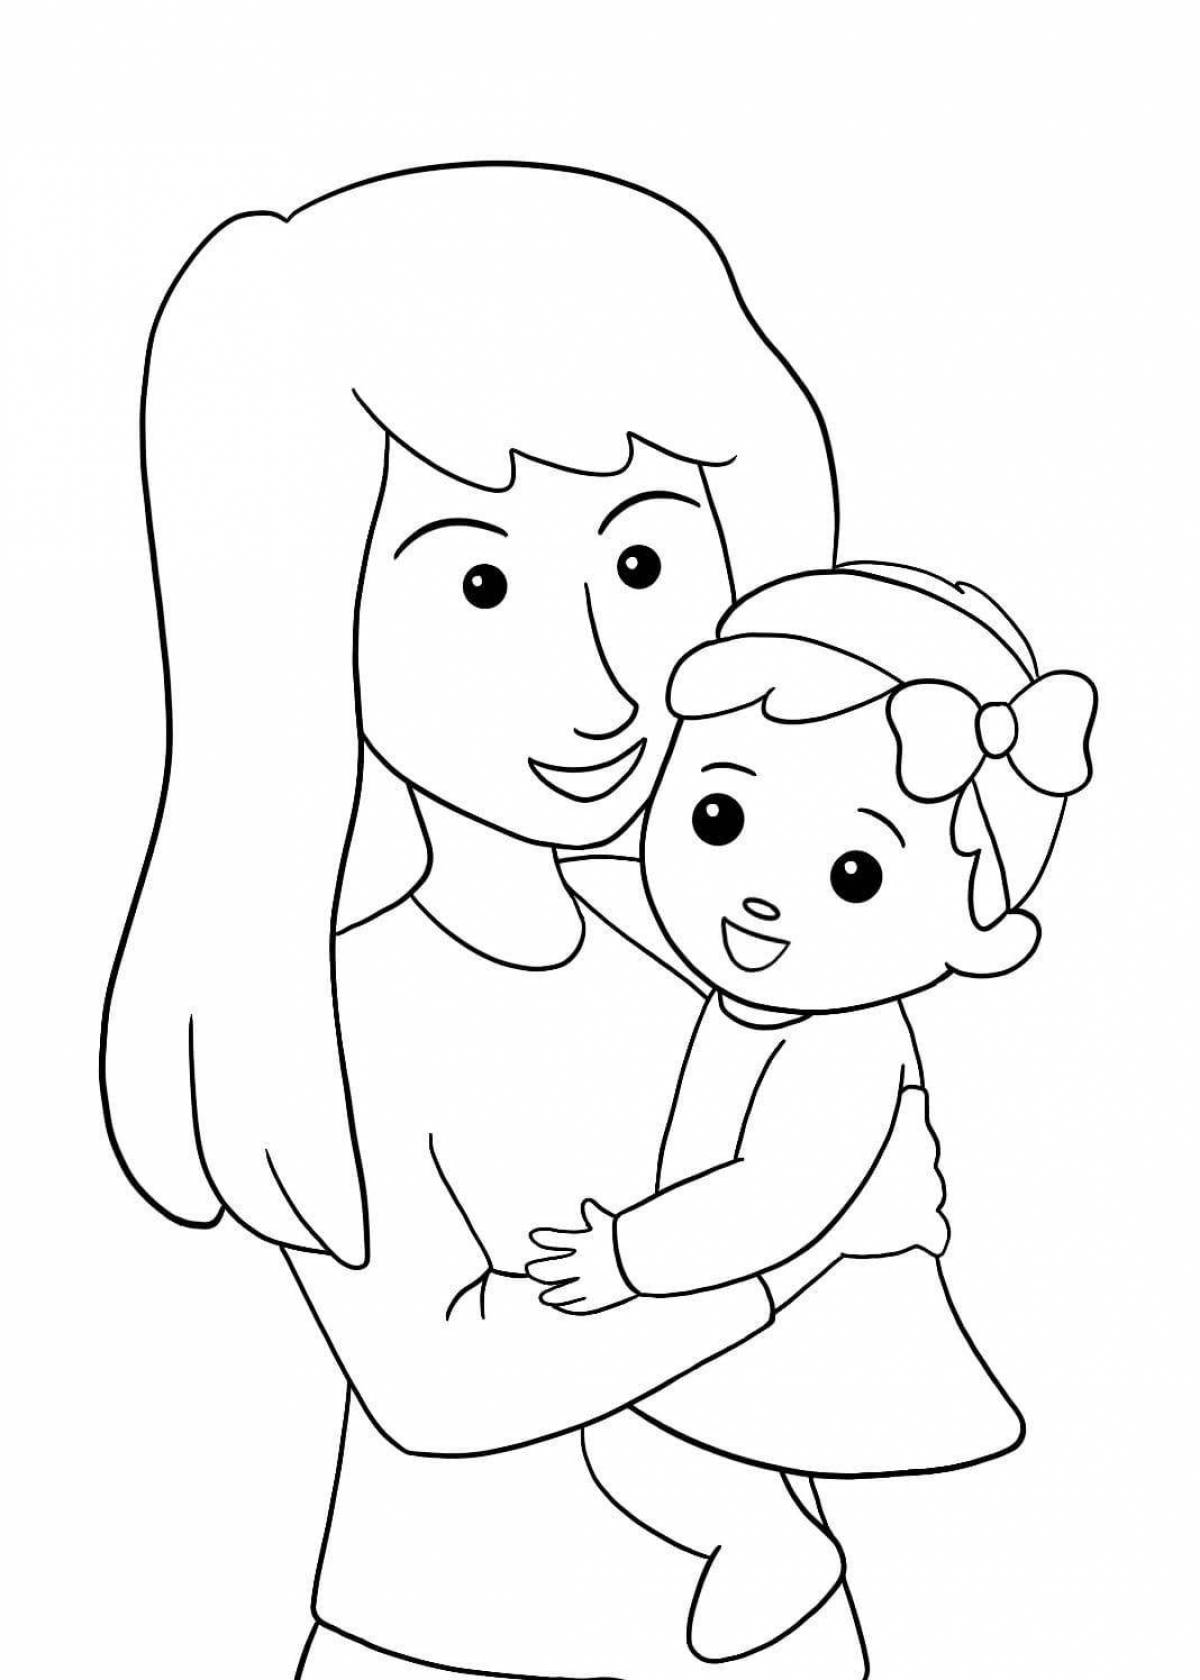 Creative mom and dad coloring book for kids